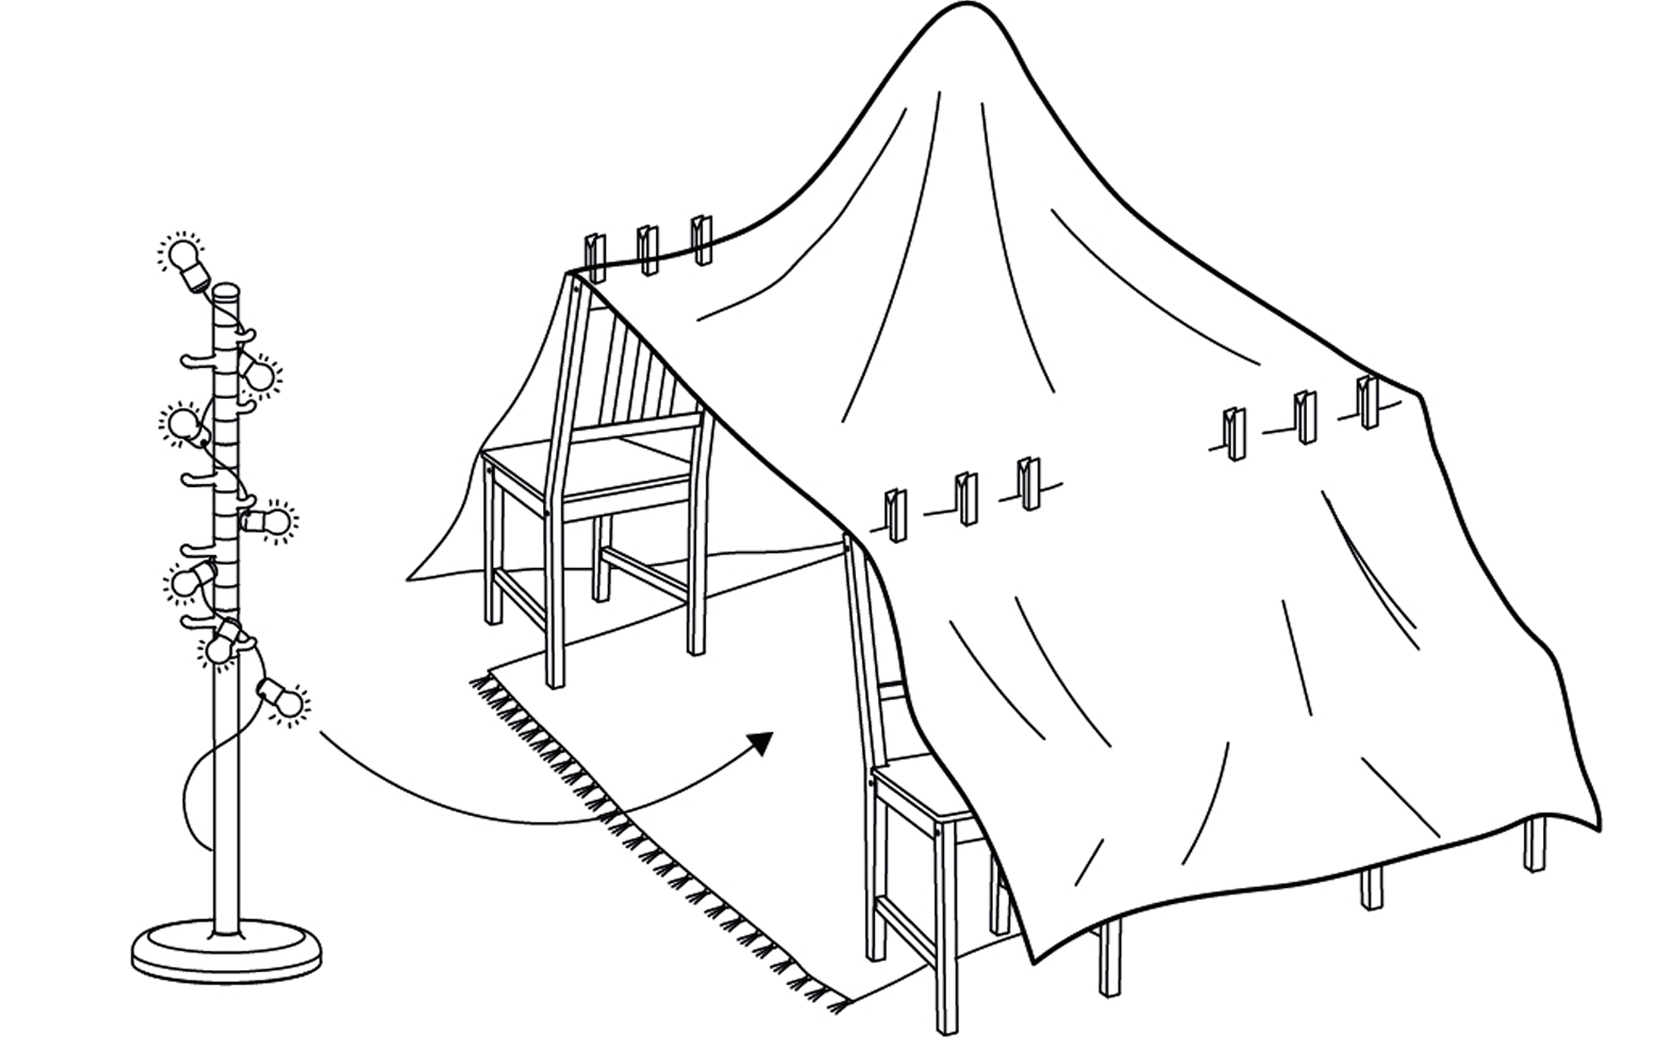 The instruction guide for the ZAMOK IKEA blanket fort.